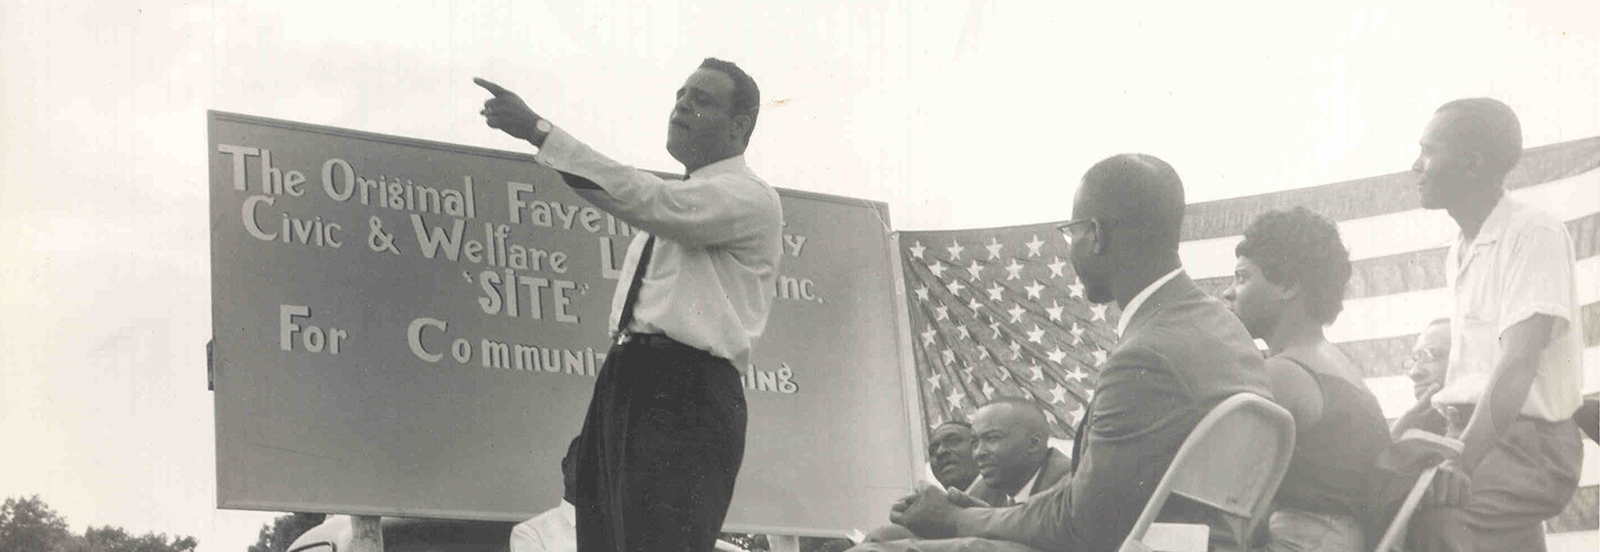 The movement was led and organized by the local Black community